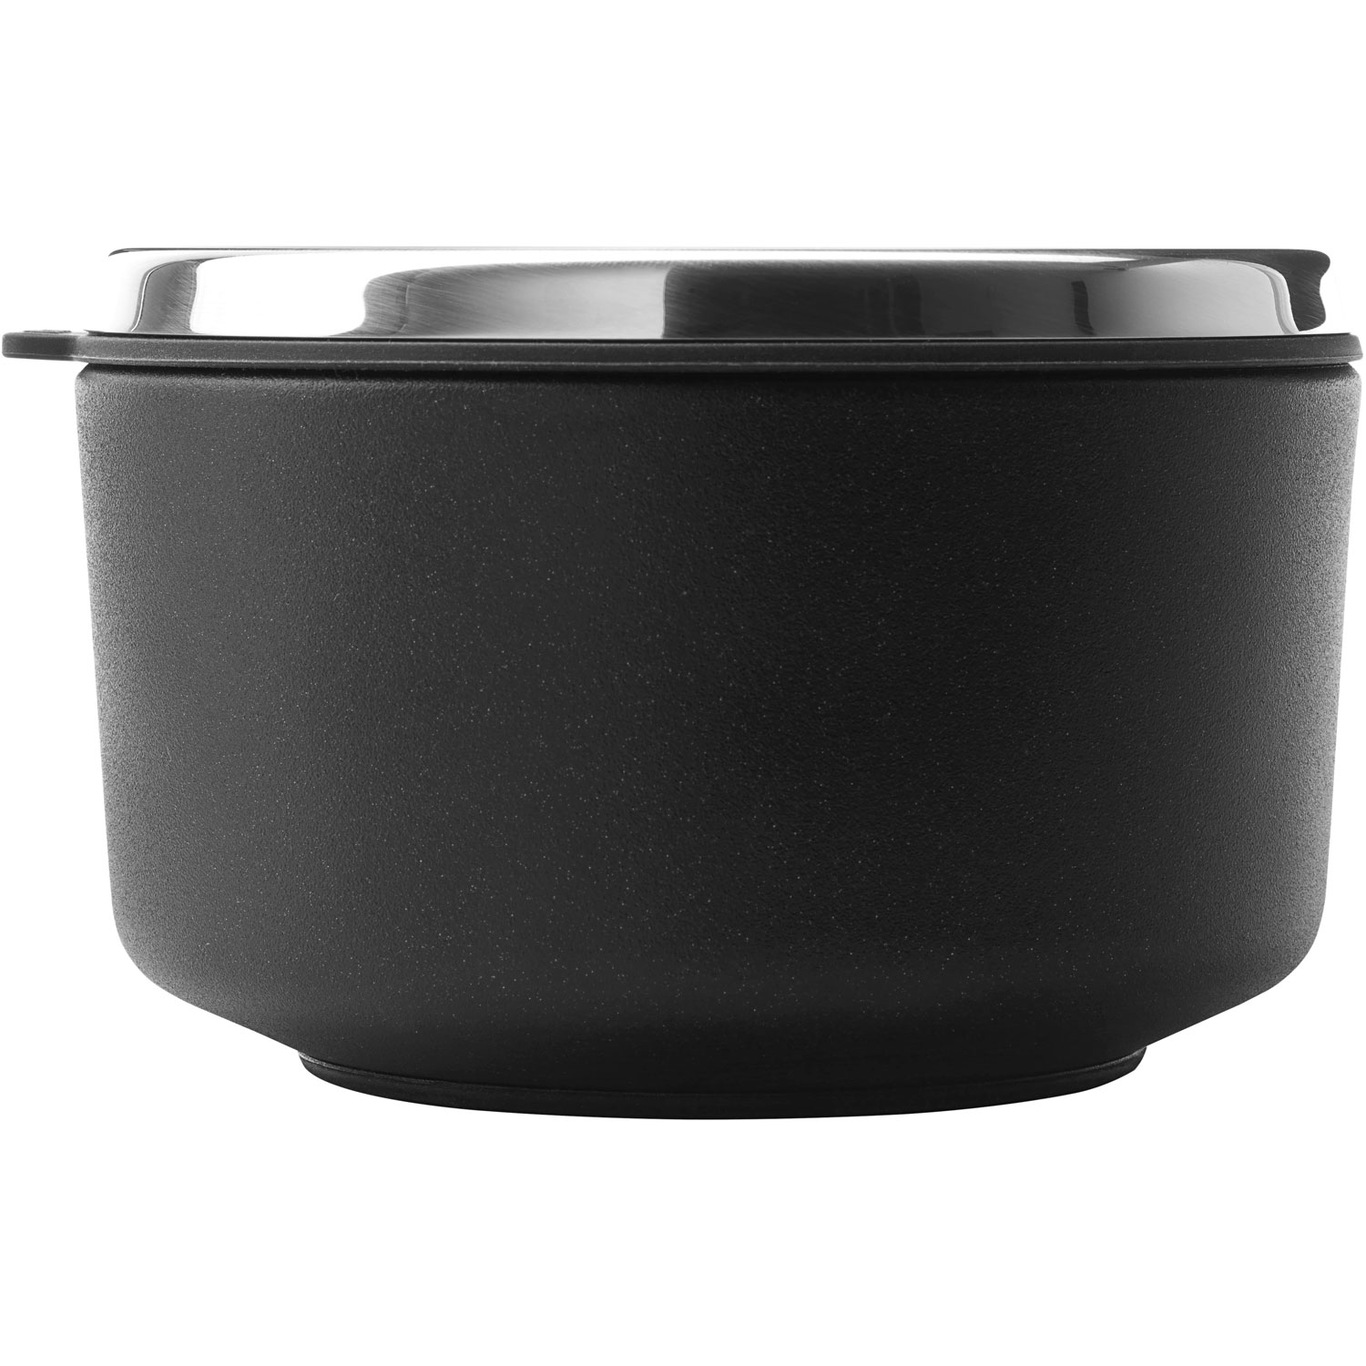 10 Container With Lid, Black